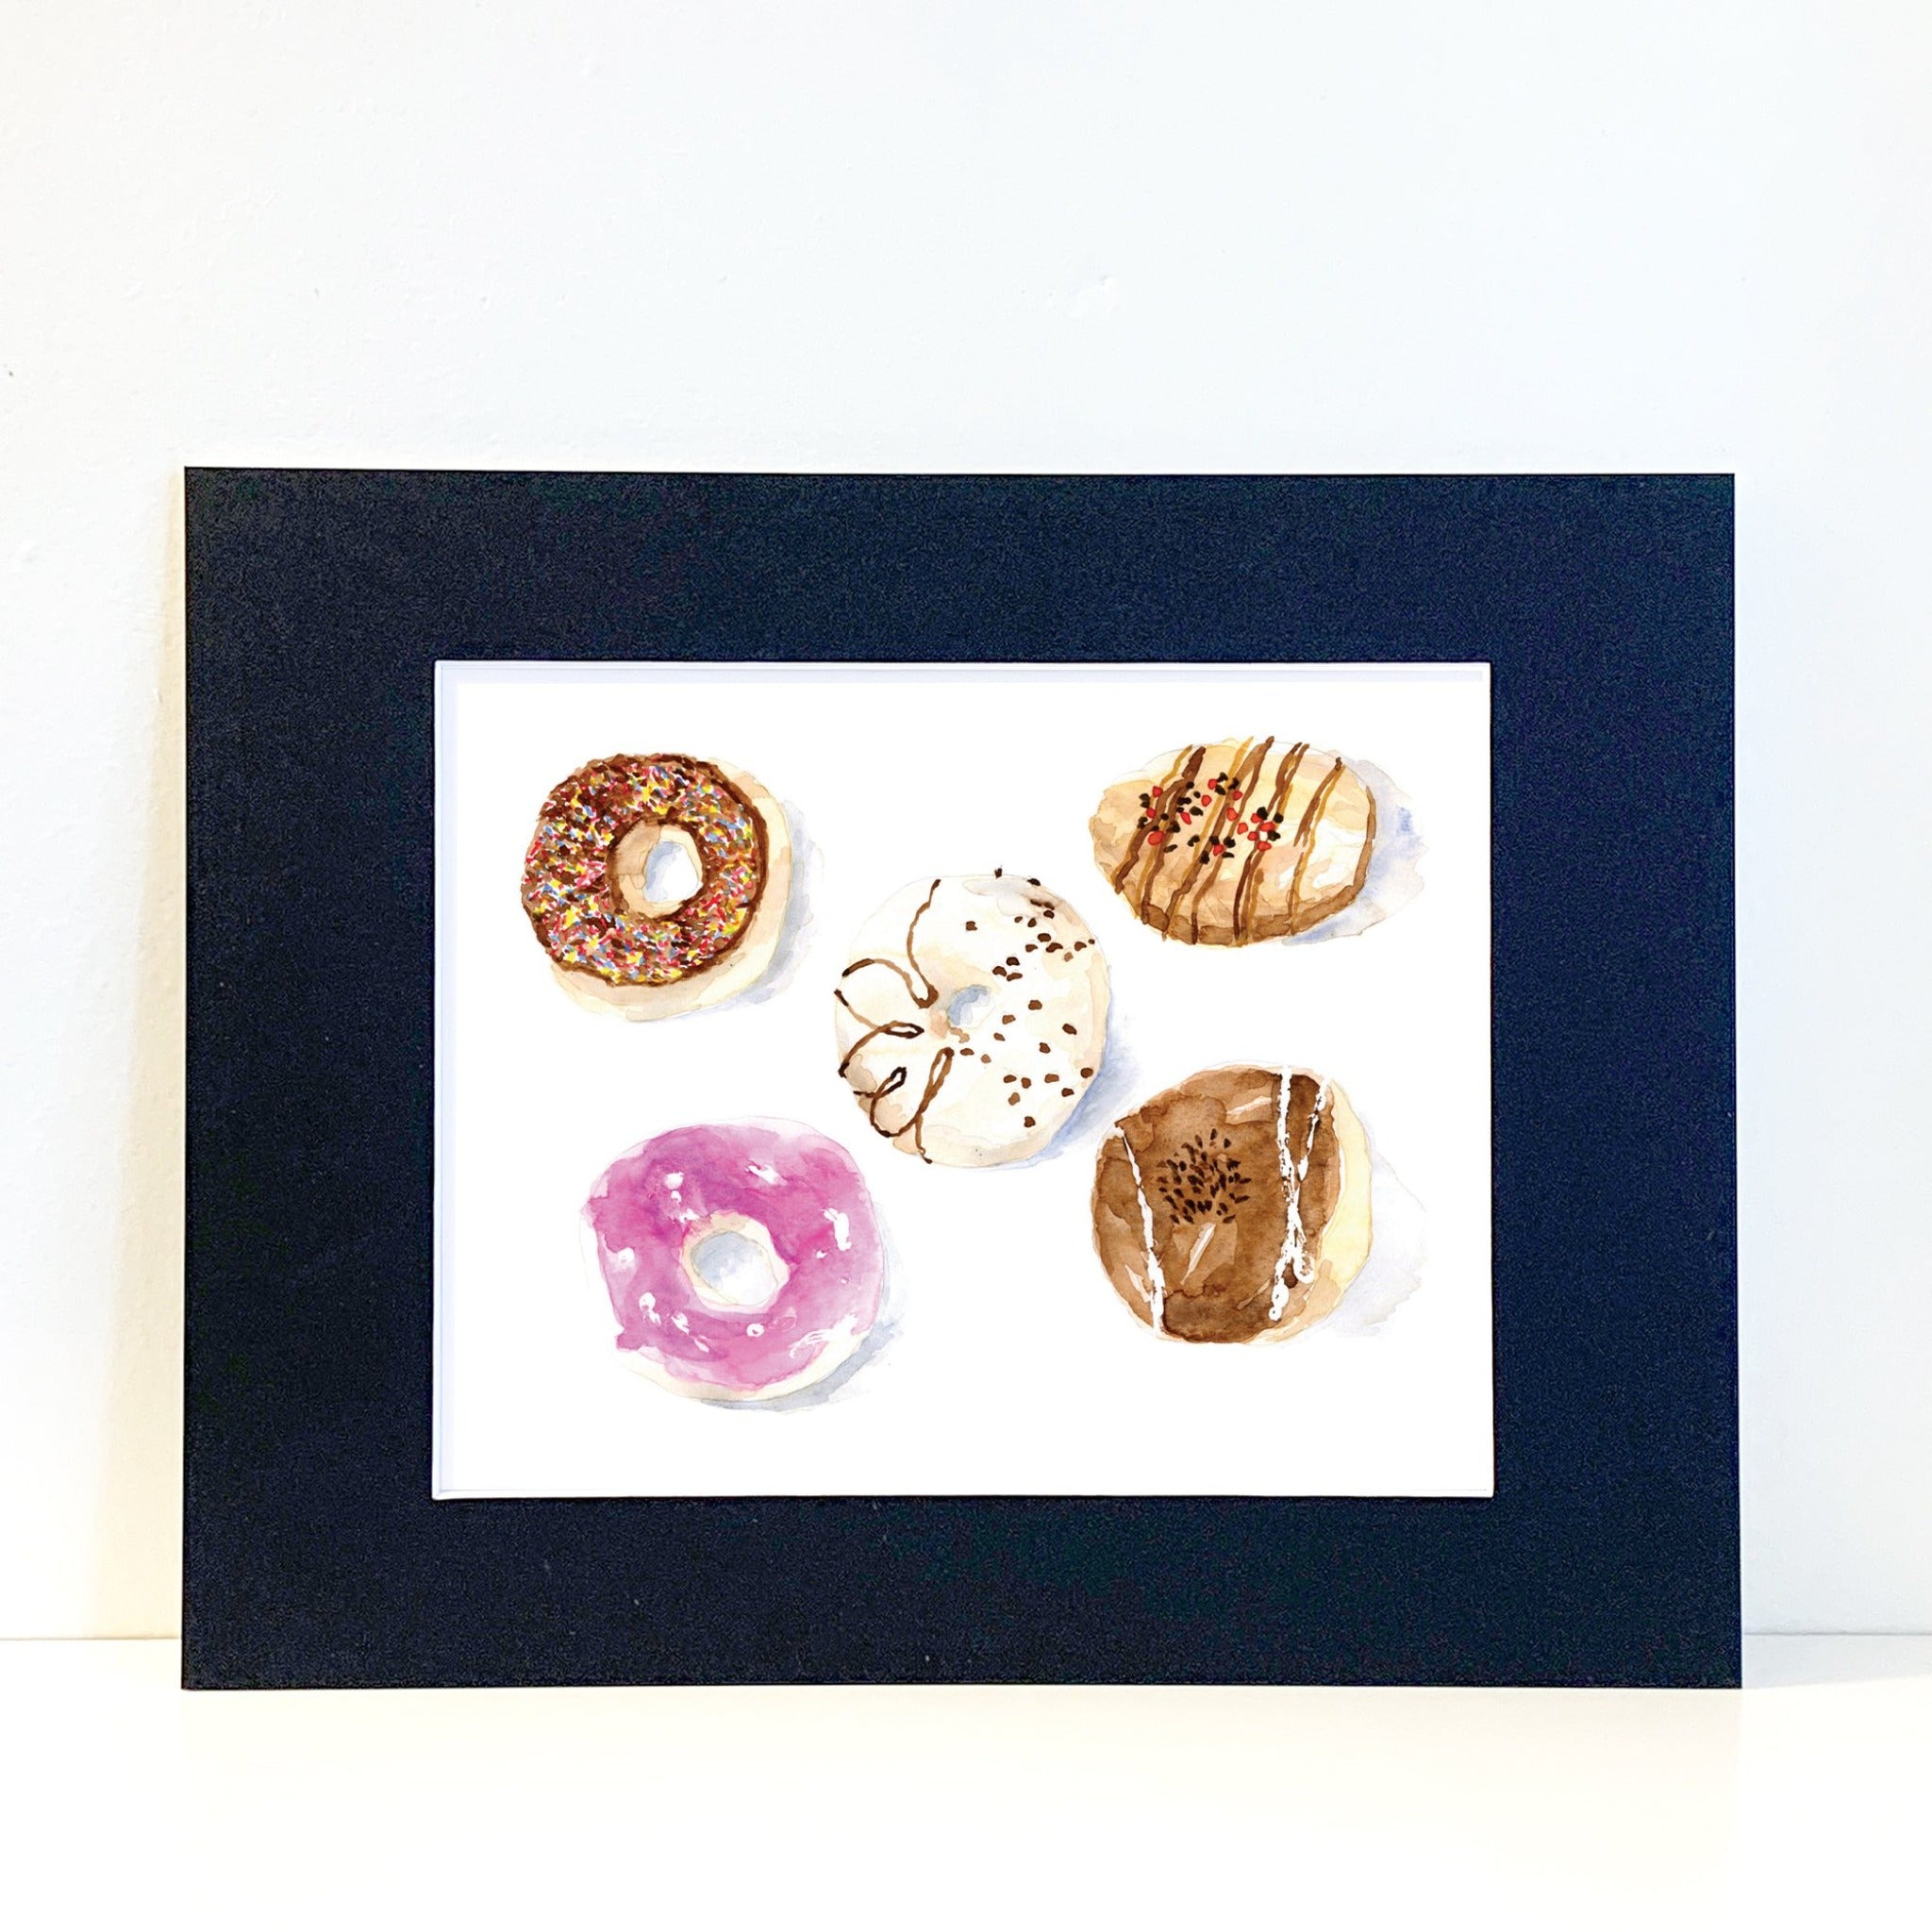 Donuts done in watercolor by Flamingo Shores of PA